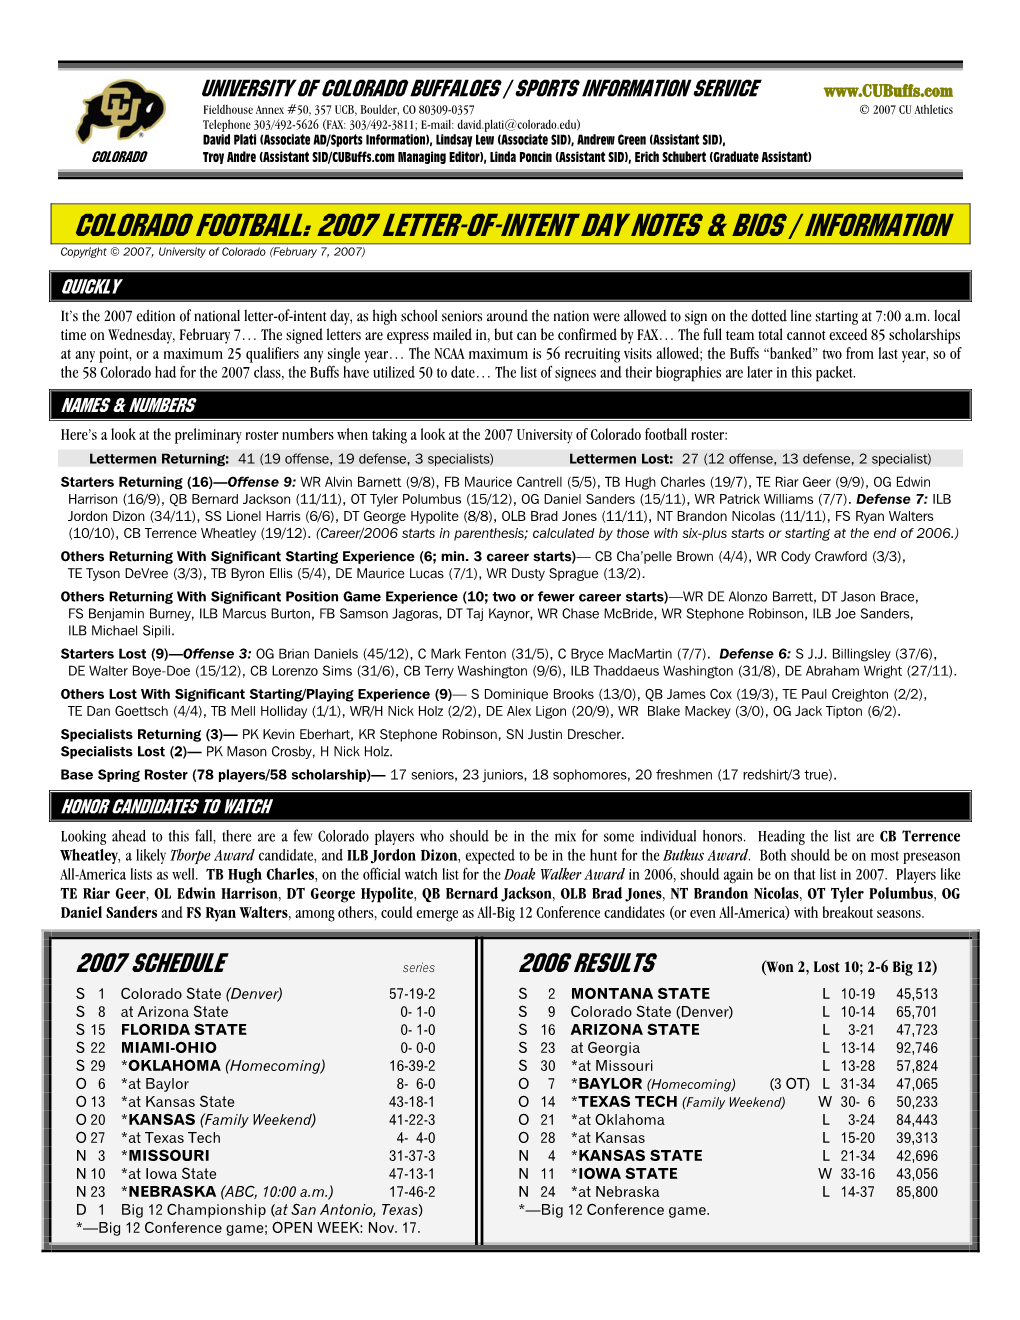 Colorado Football: 2007 Letter-Of-Intent Day Notes & Bios / Information Copyright © 2007, University of Colorado (February 7, 2007)